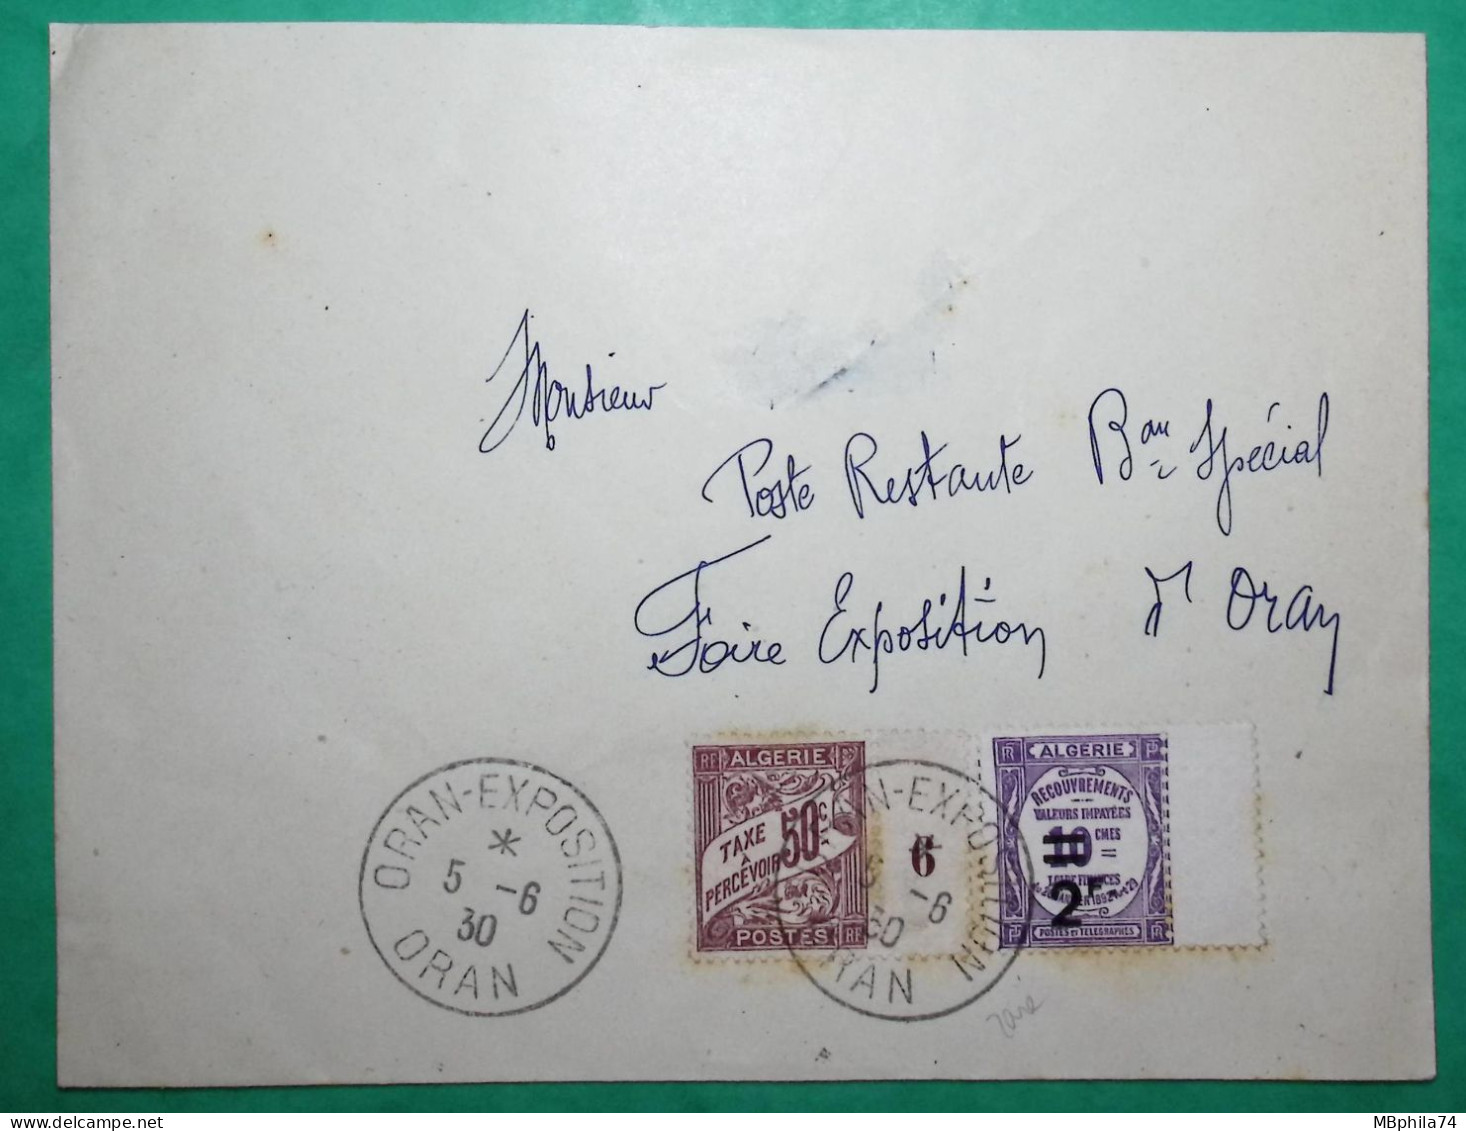 TIMBRES TAXES 50C DUVAL ALGERIE MILLESIME 6 + TAXE RECOUVREMENT SURCHARGE 2F ORAN EXPOSITION 1930 COVER FRANCE - Strafport